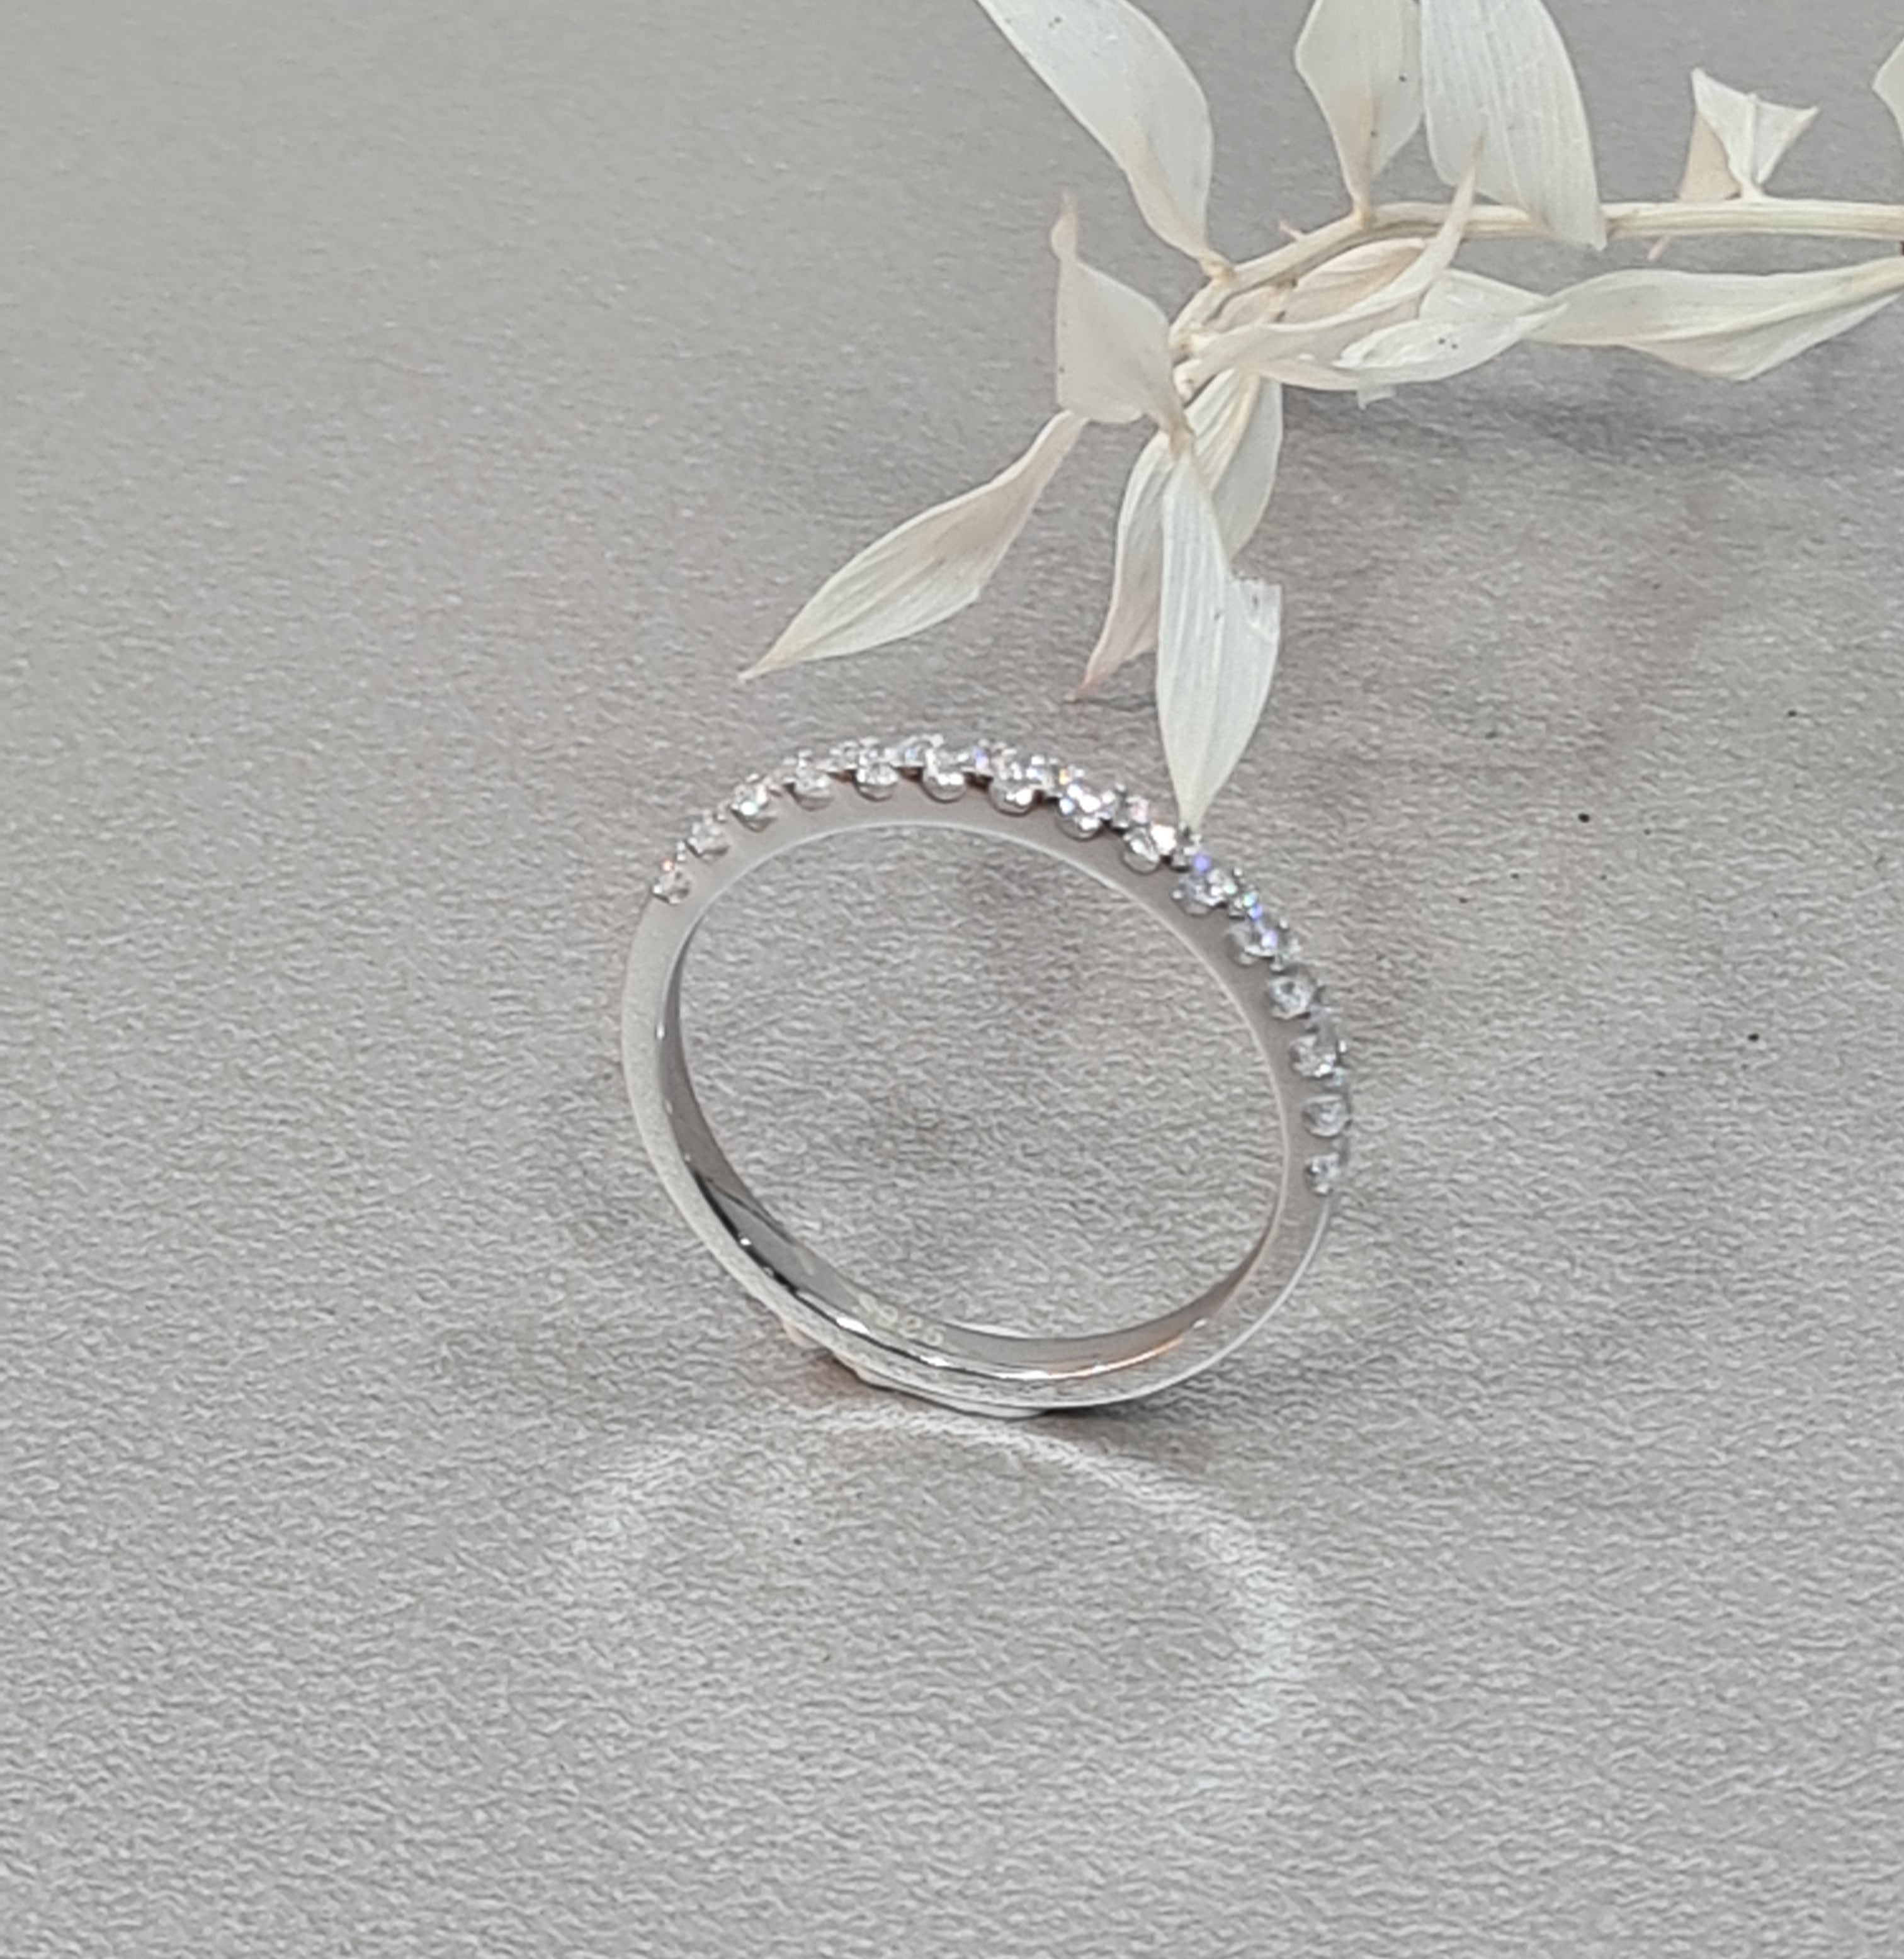 Stackable Eternity Ring